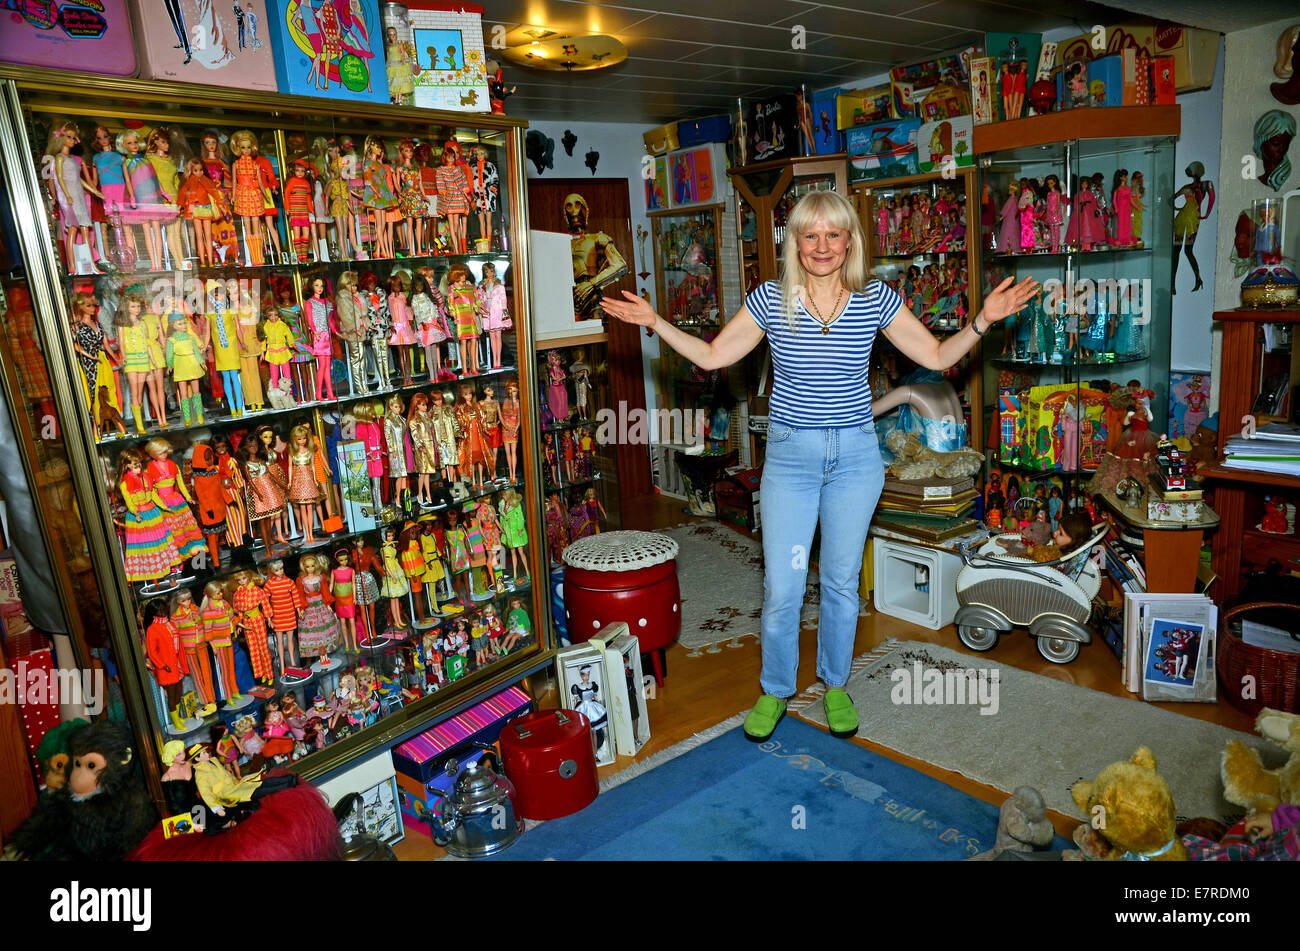 fictie tactiek Terminologie Duesseldorf, Germany. 12th Sep, 2014. dpa-Exclusive - The Barbie doll  collector Bettina Dorfmann poses before her Barbie collection in her house  in Duesseldorf, Germany, 12 September 2014. With around 15,000 Barbies, she